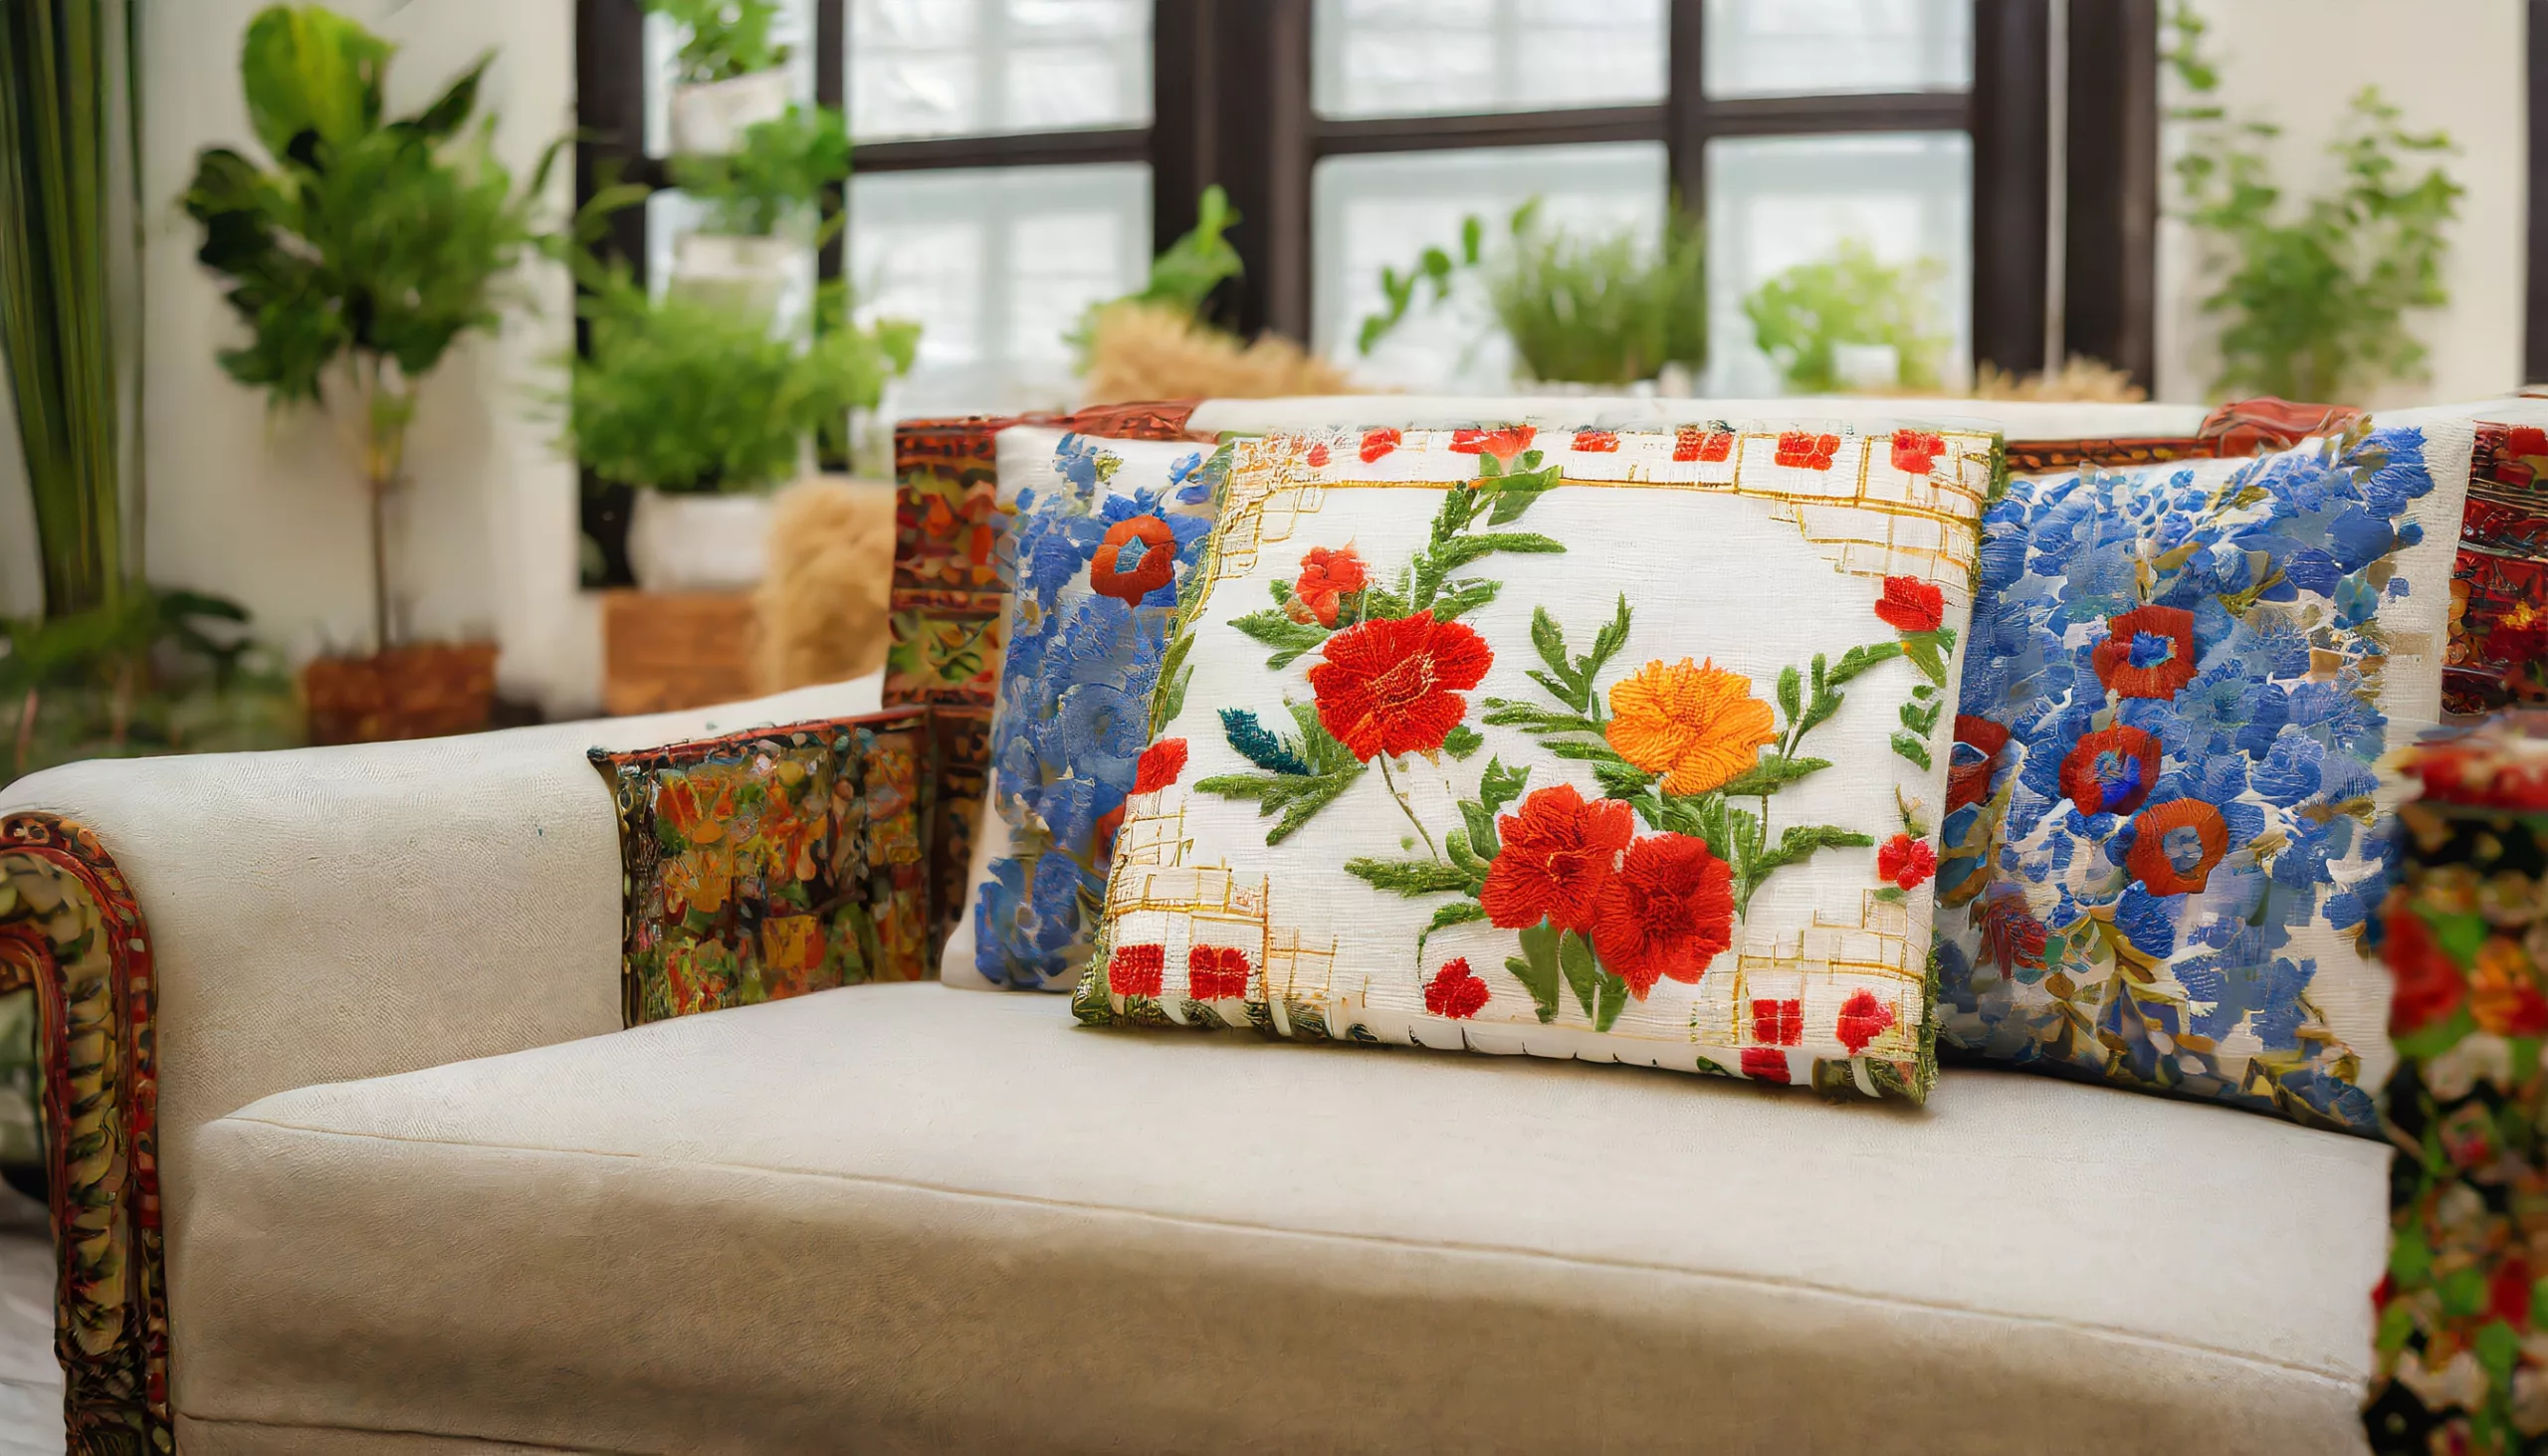 An image of an embroidered cushion in a living room